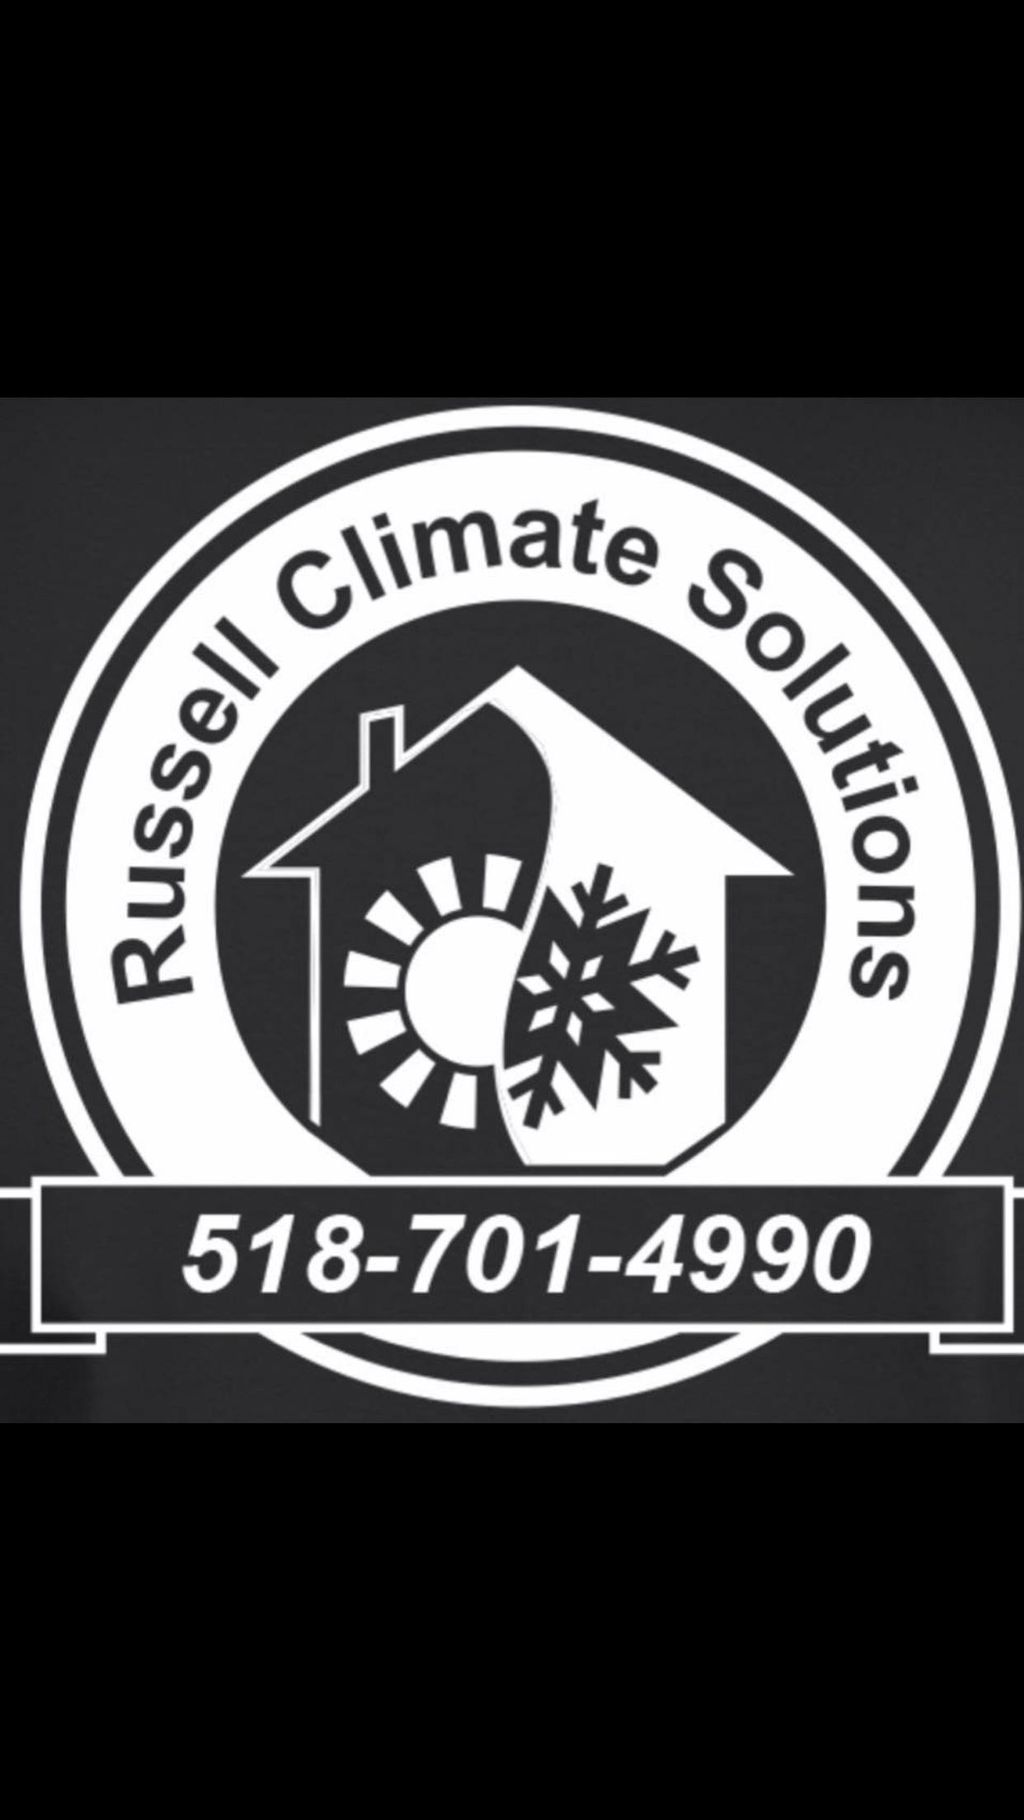 Russell climate solutions